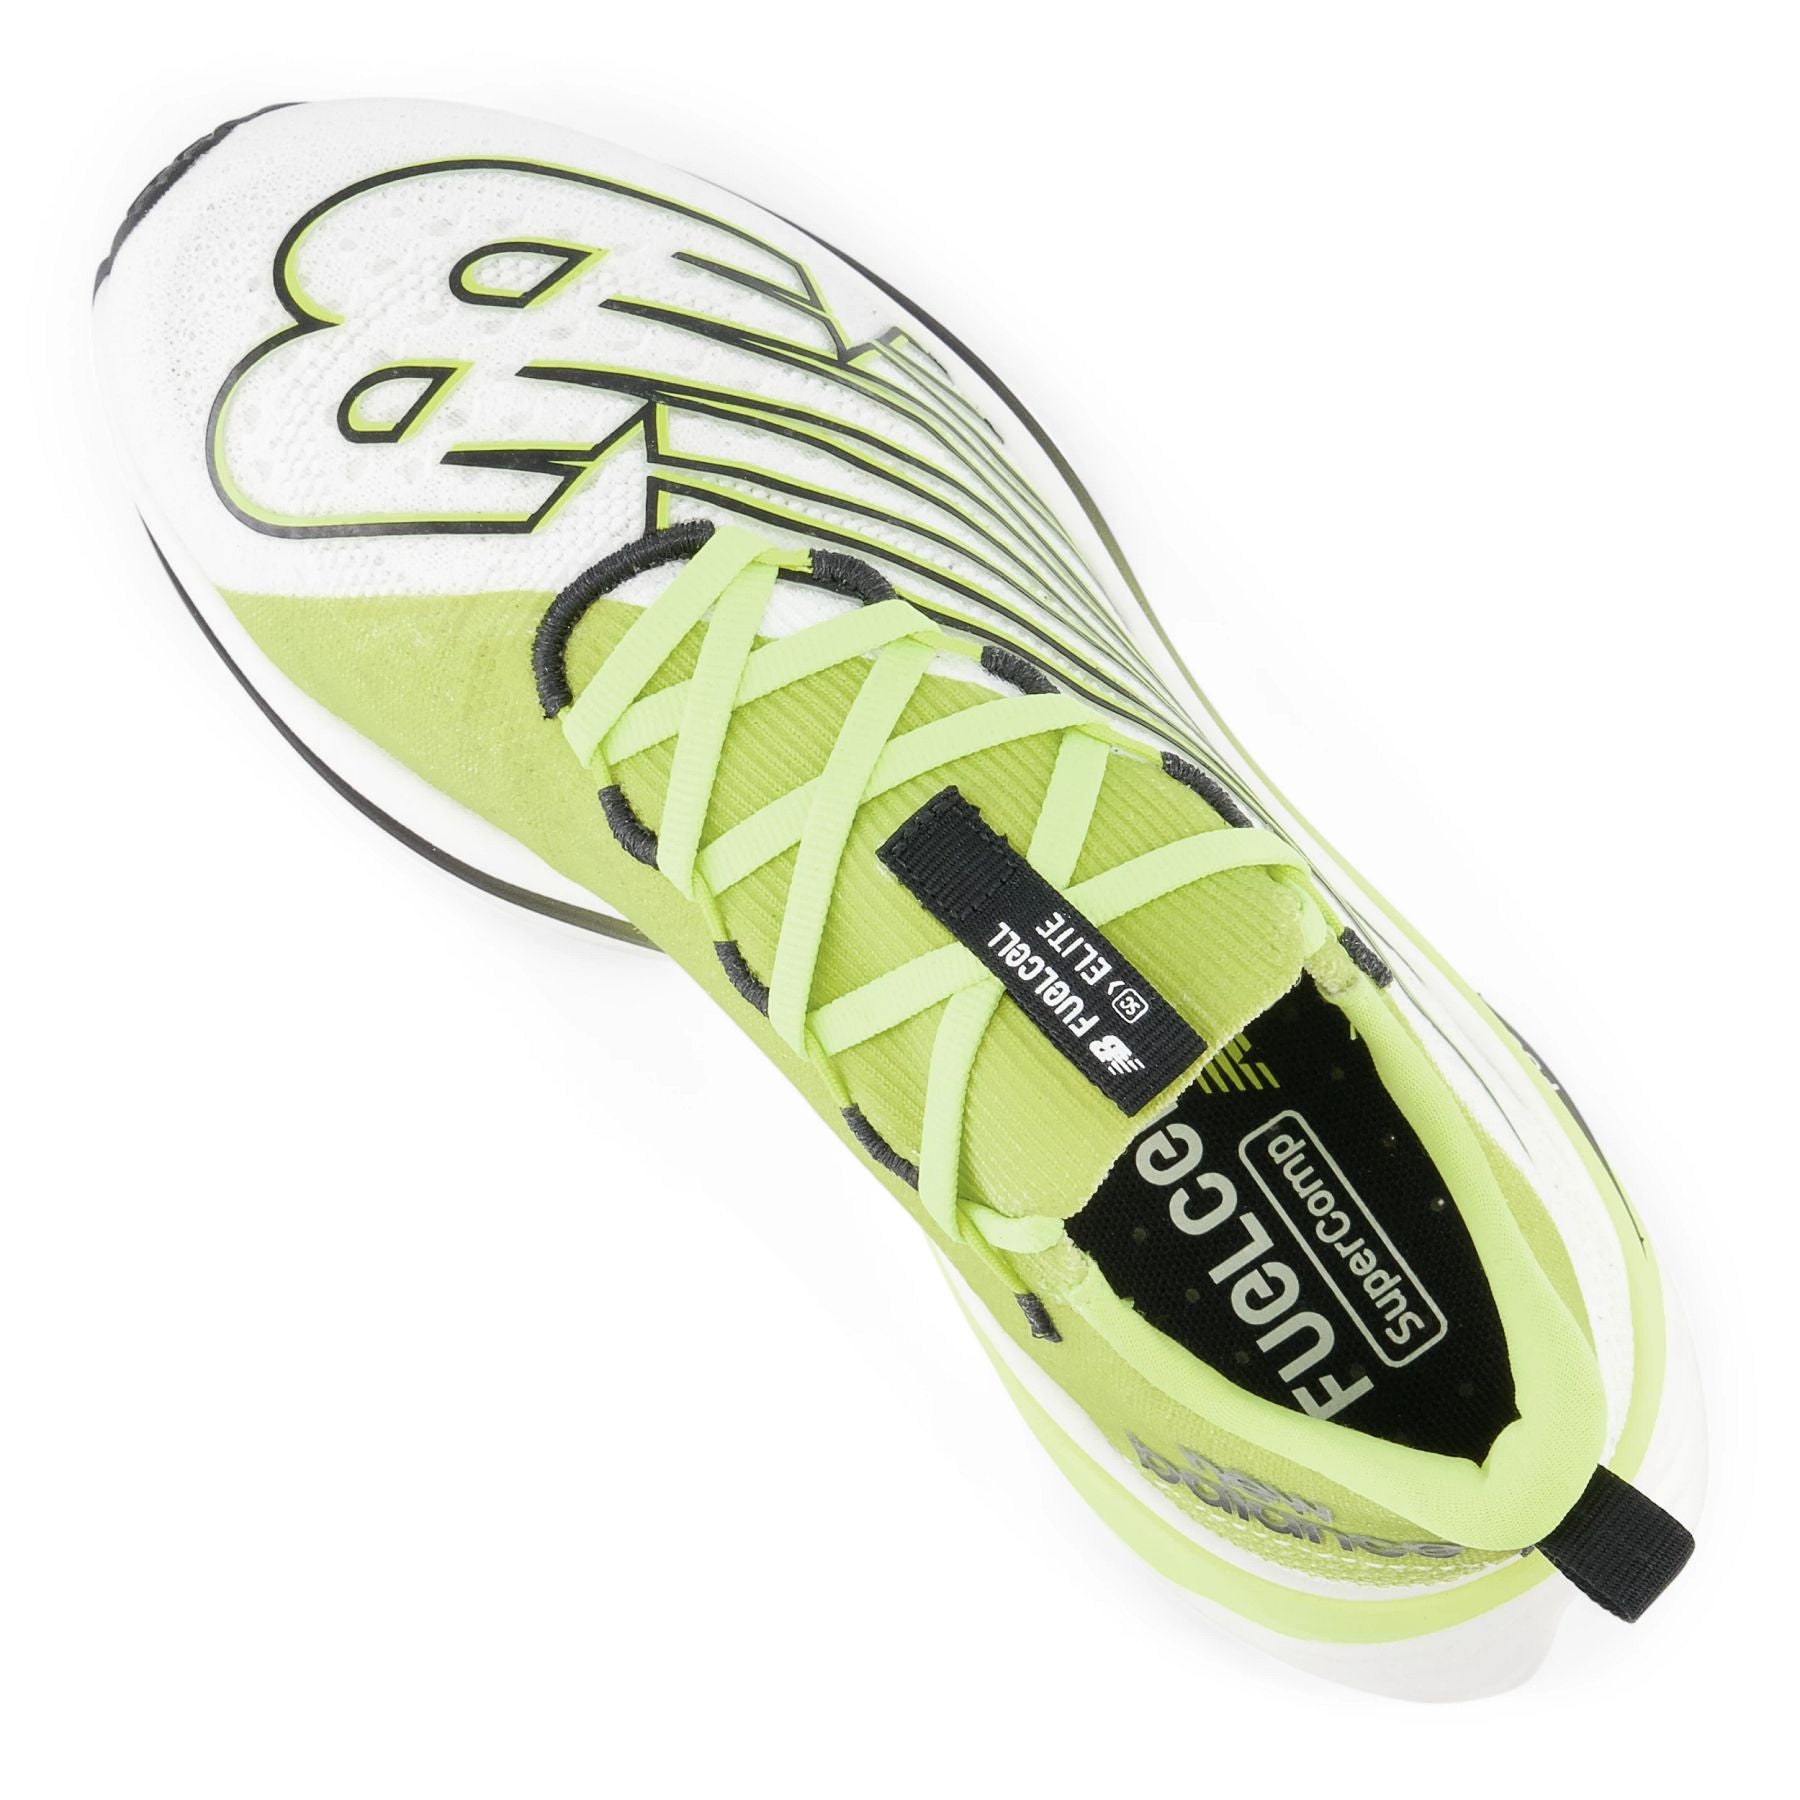 Top angle view of the Men's Super Comp Elite V3 by New Balance in Thirty Watt/Black/Cosmic Rose